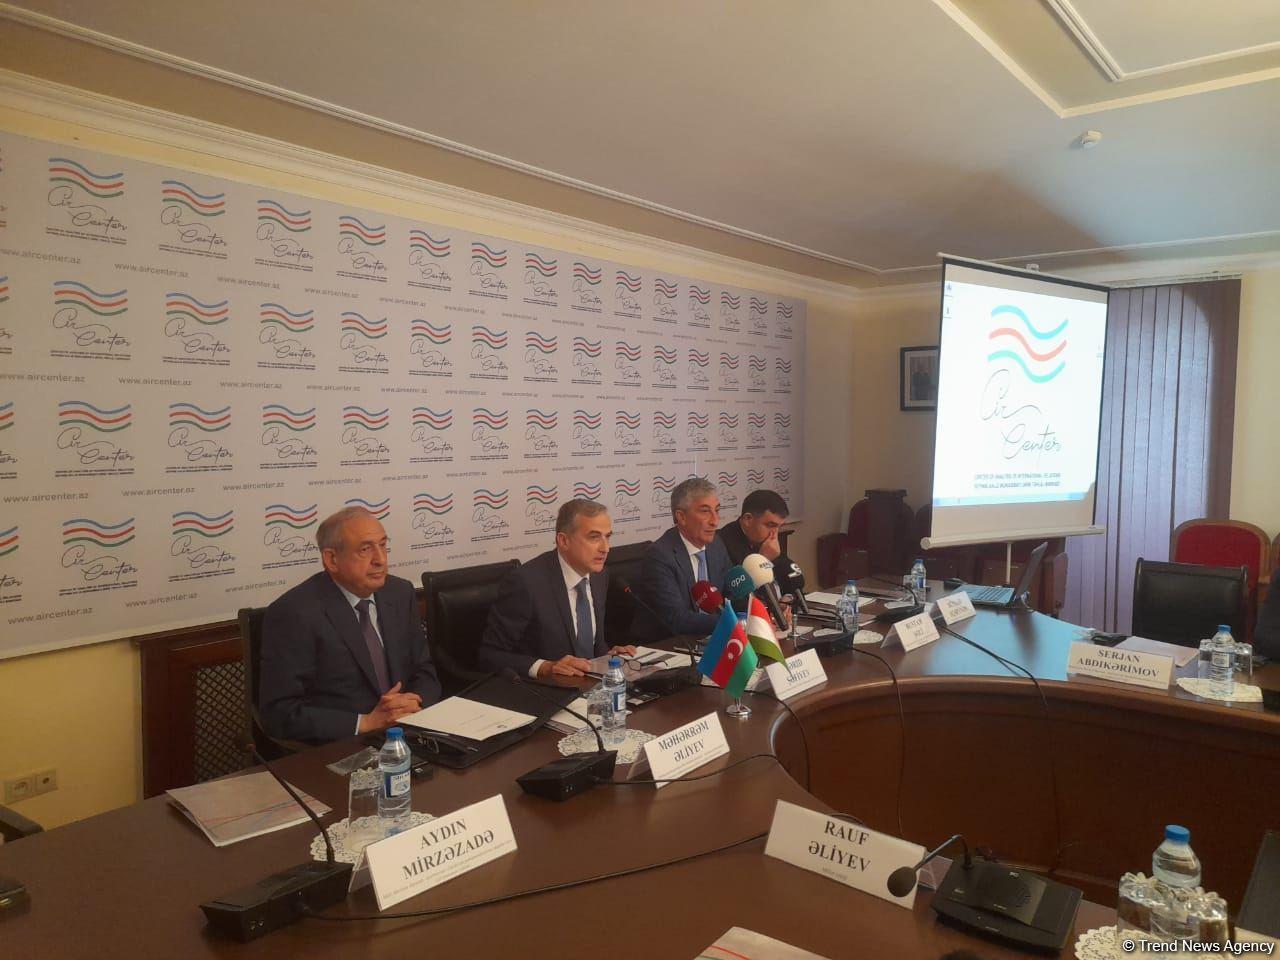 Top official: Azerbaijani lands' liberation facilitates co-op with all partners [PHOTO]